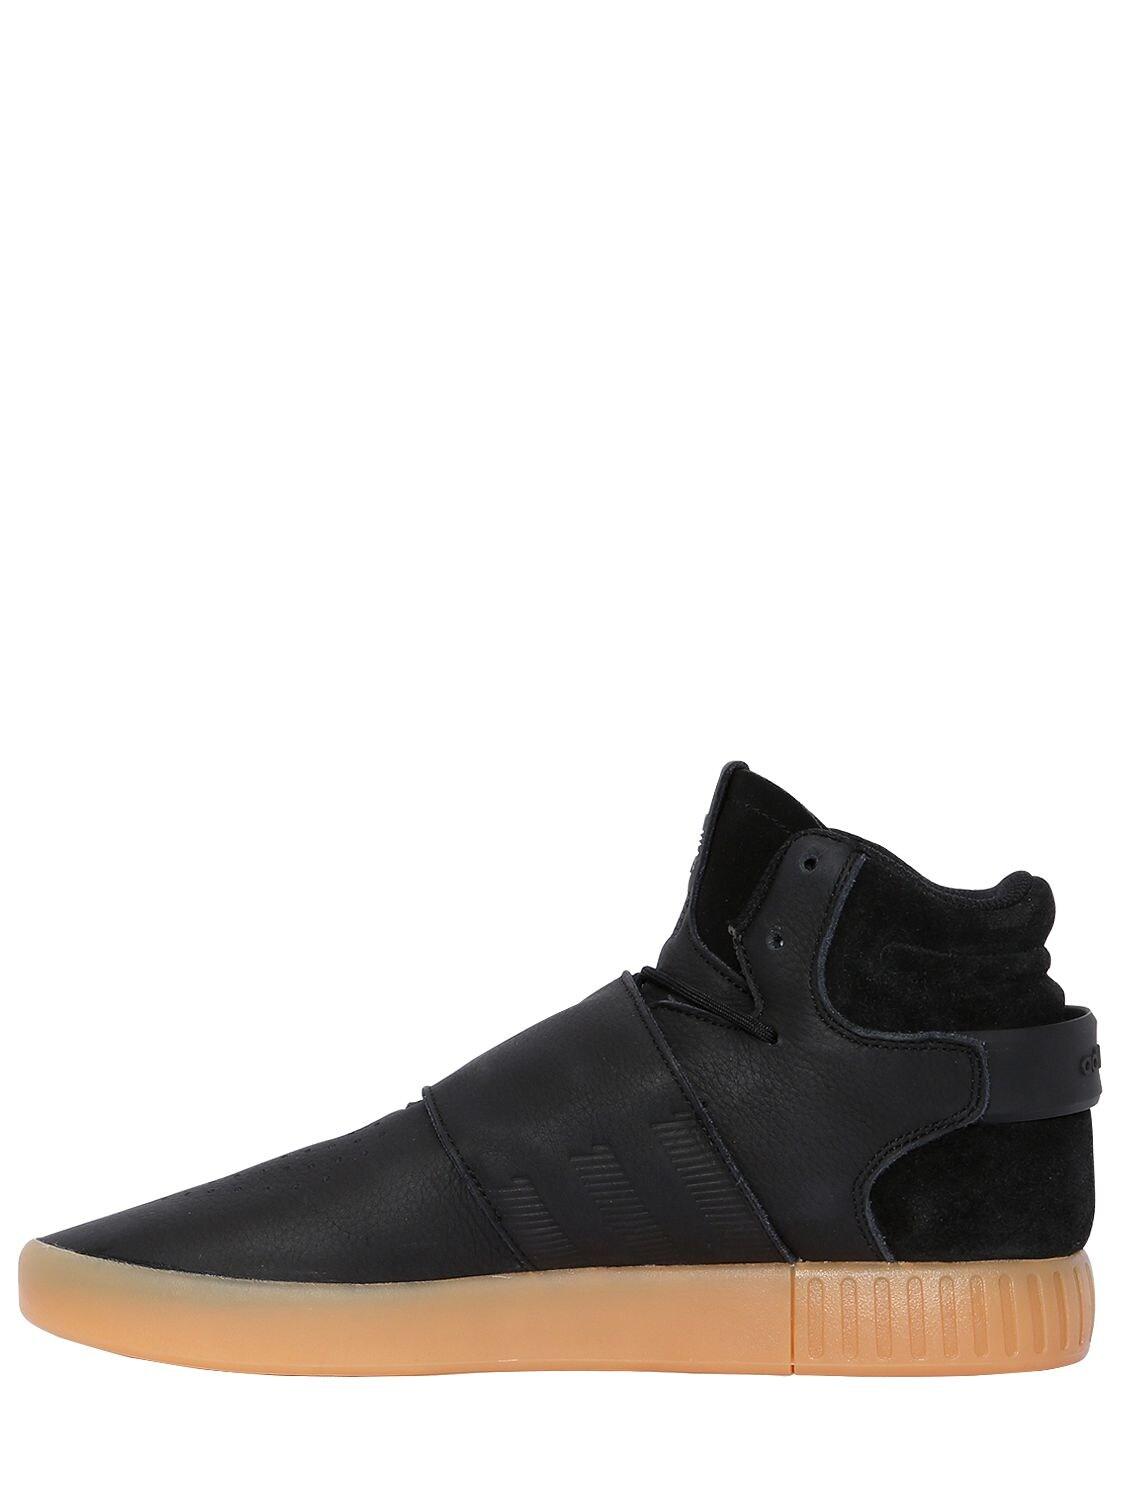 adidas Originals Leather Tubular Invader Strap Mid Top Sneakers in Black  for Men | Lyst